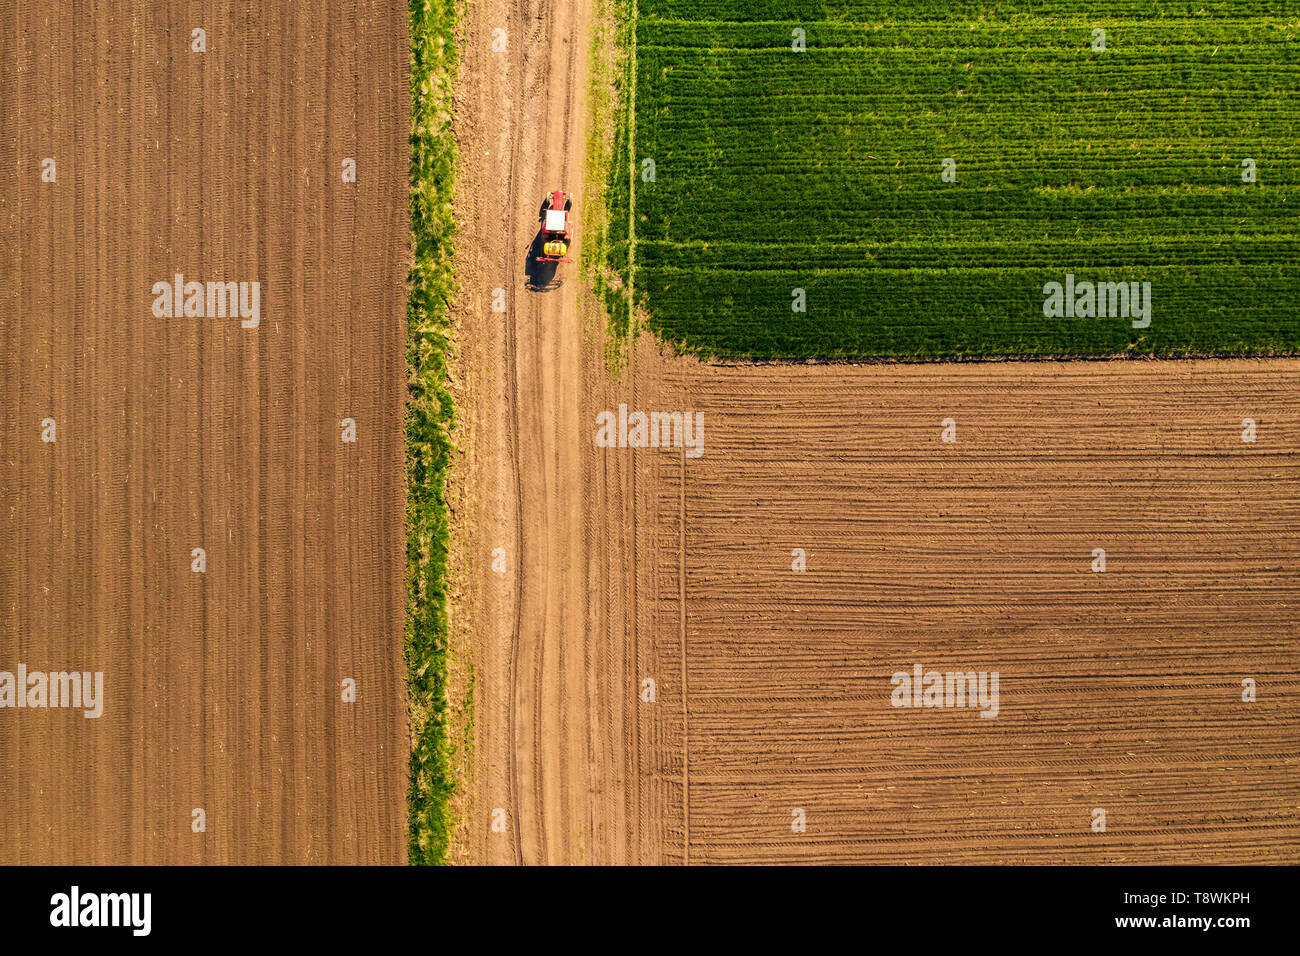 Aerial view of tractor with attached crop sprayer on countryside dirt road heading toward the field, top down view from drone pov Stock Photo